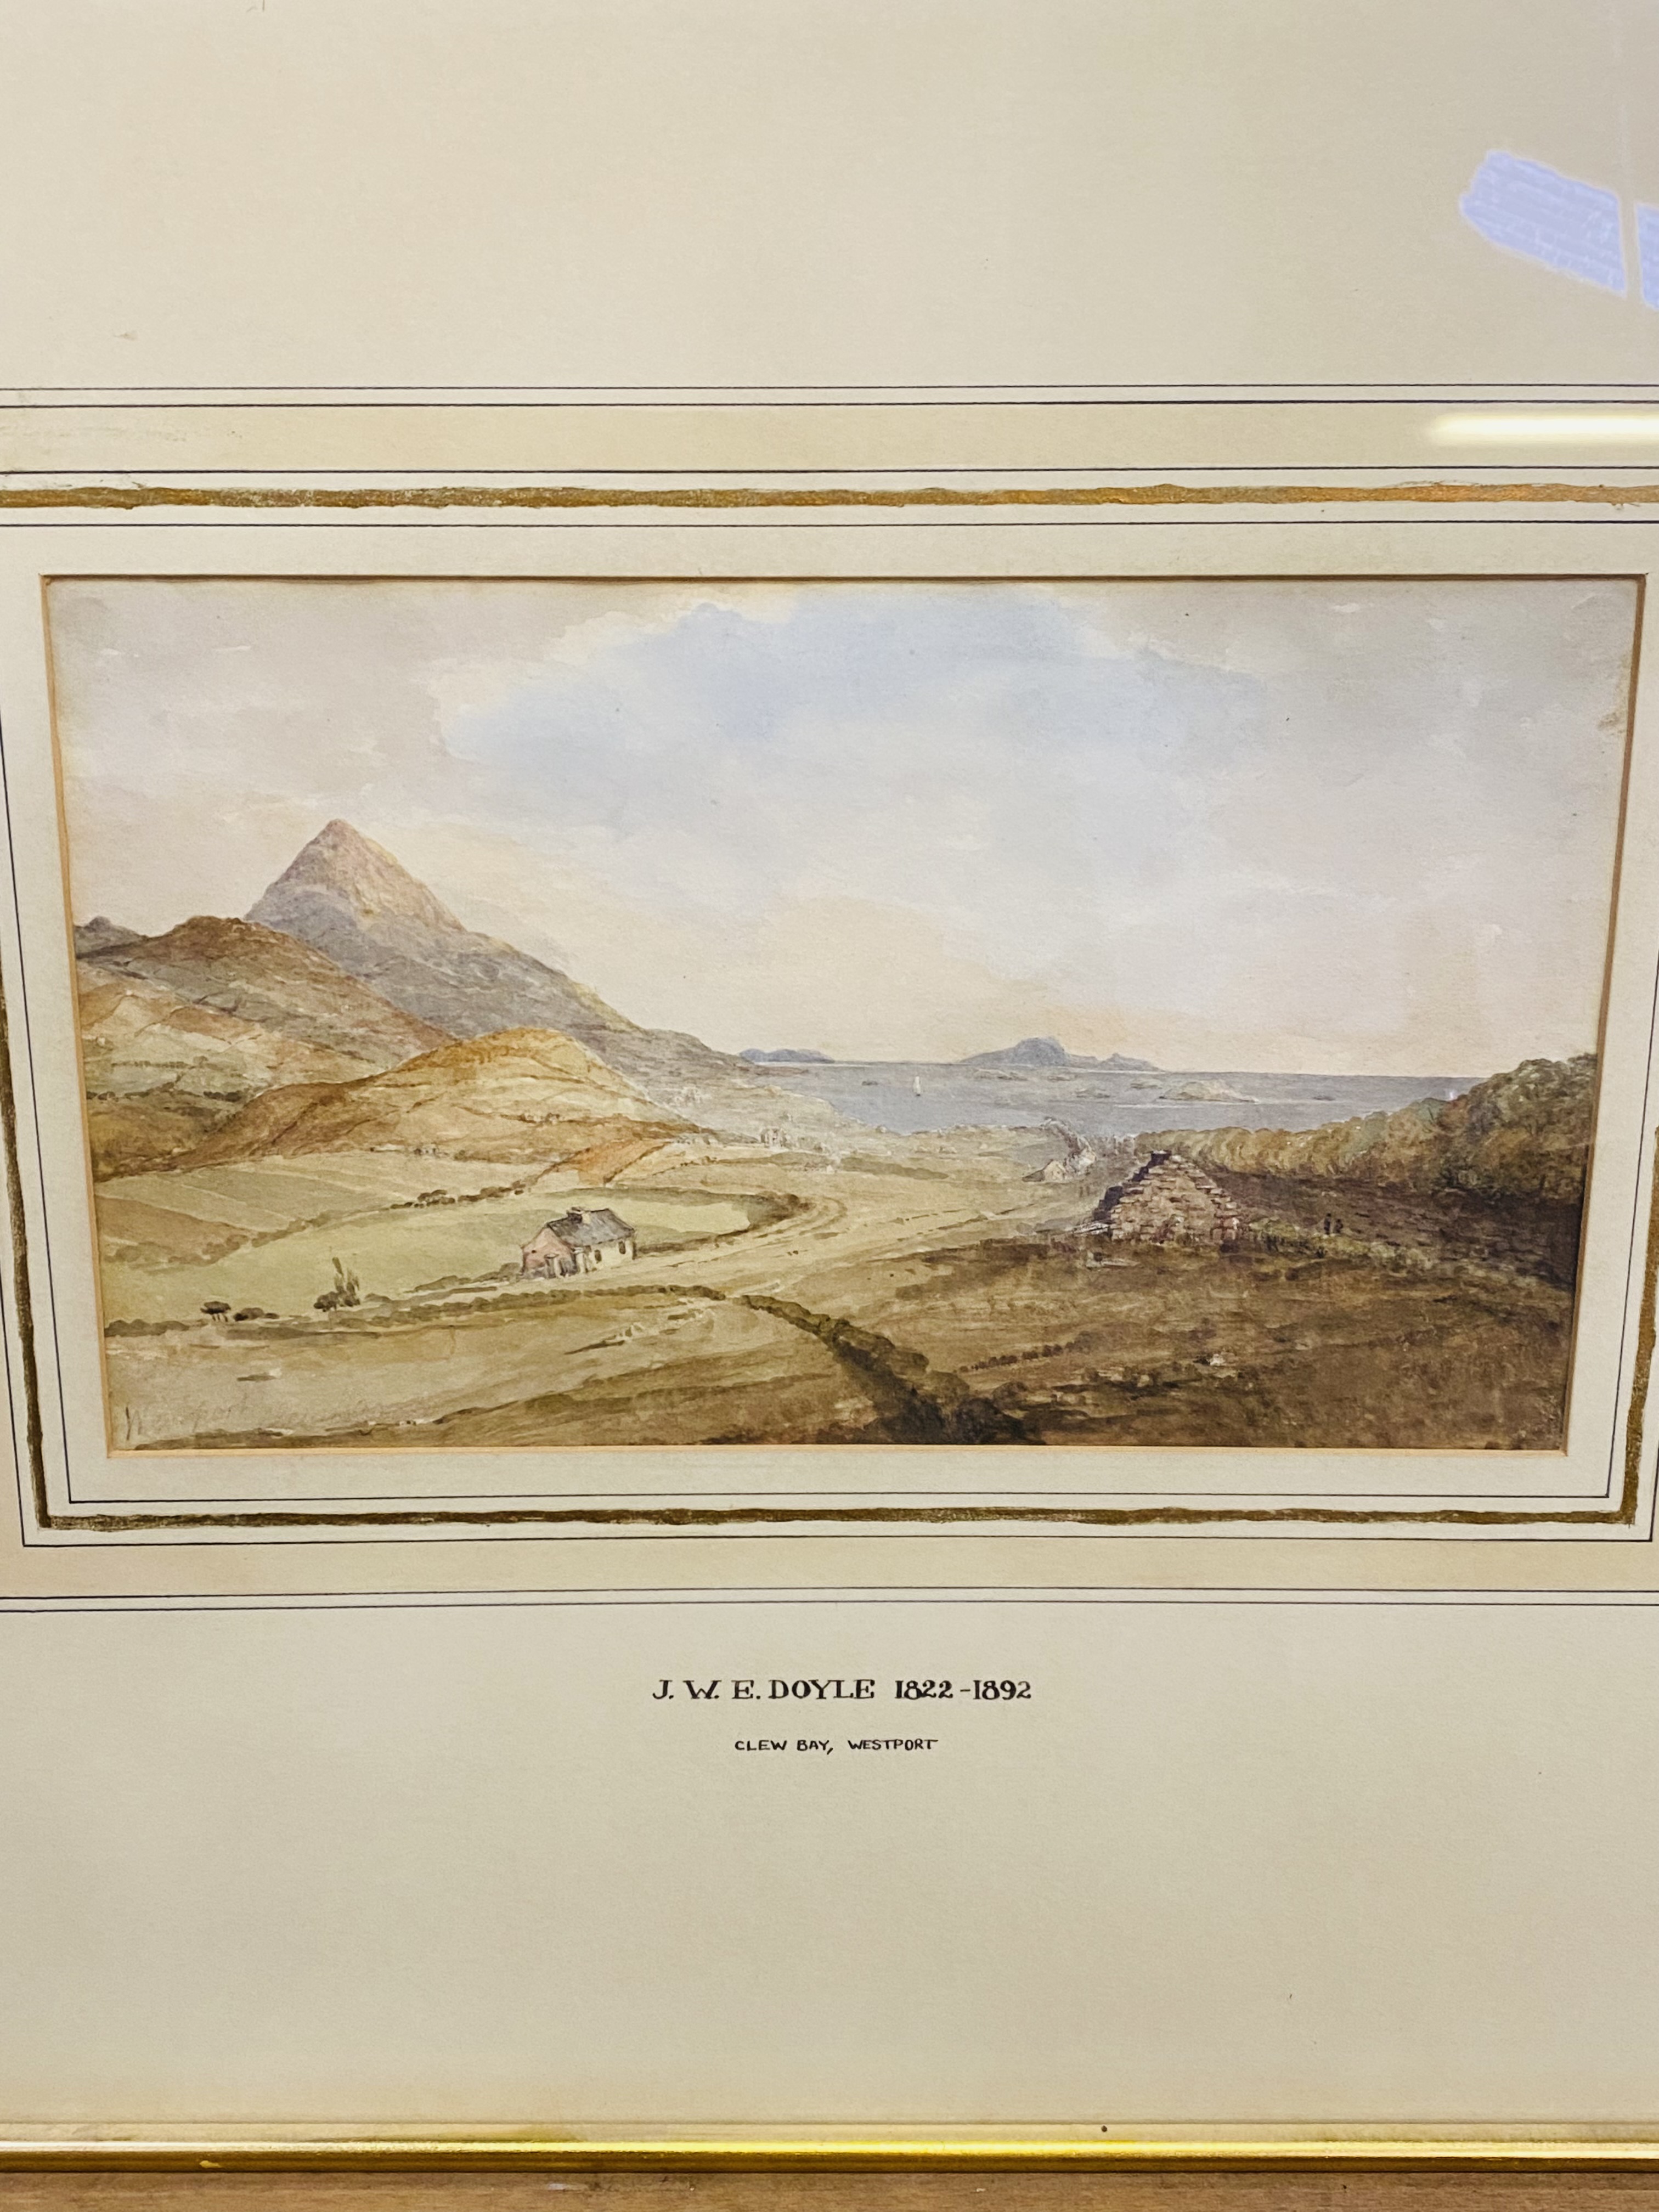 Framed and glazed watercolour of a landscape written to border, J W Doyle 1822 - 1892 - Image 3 of 4